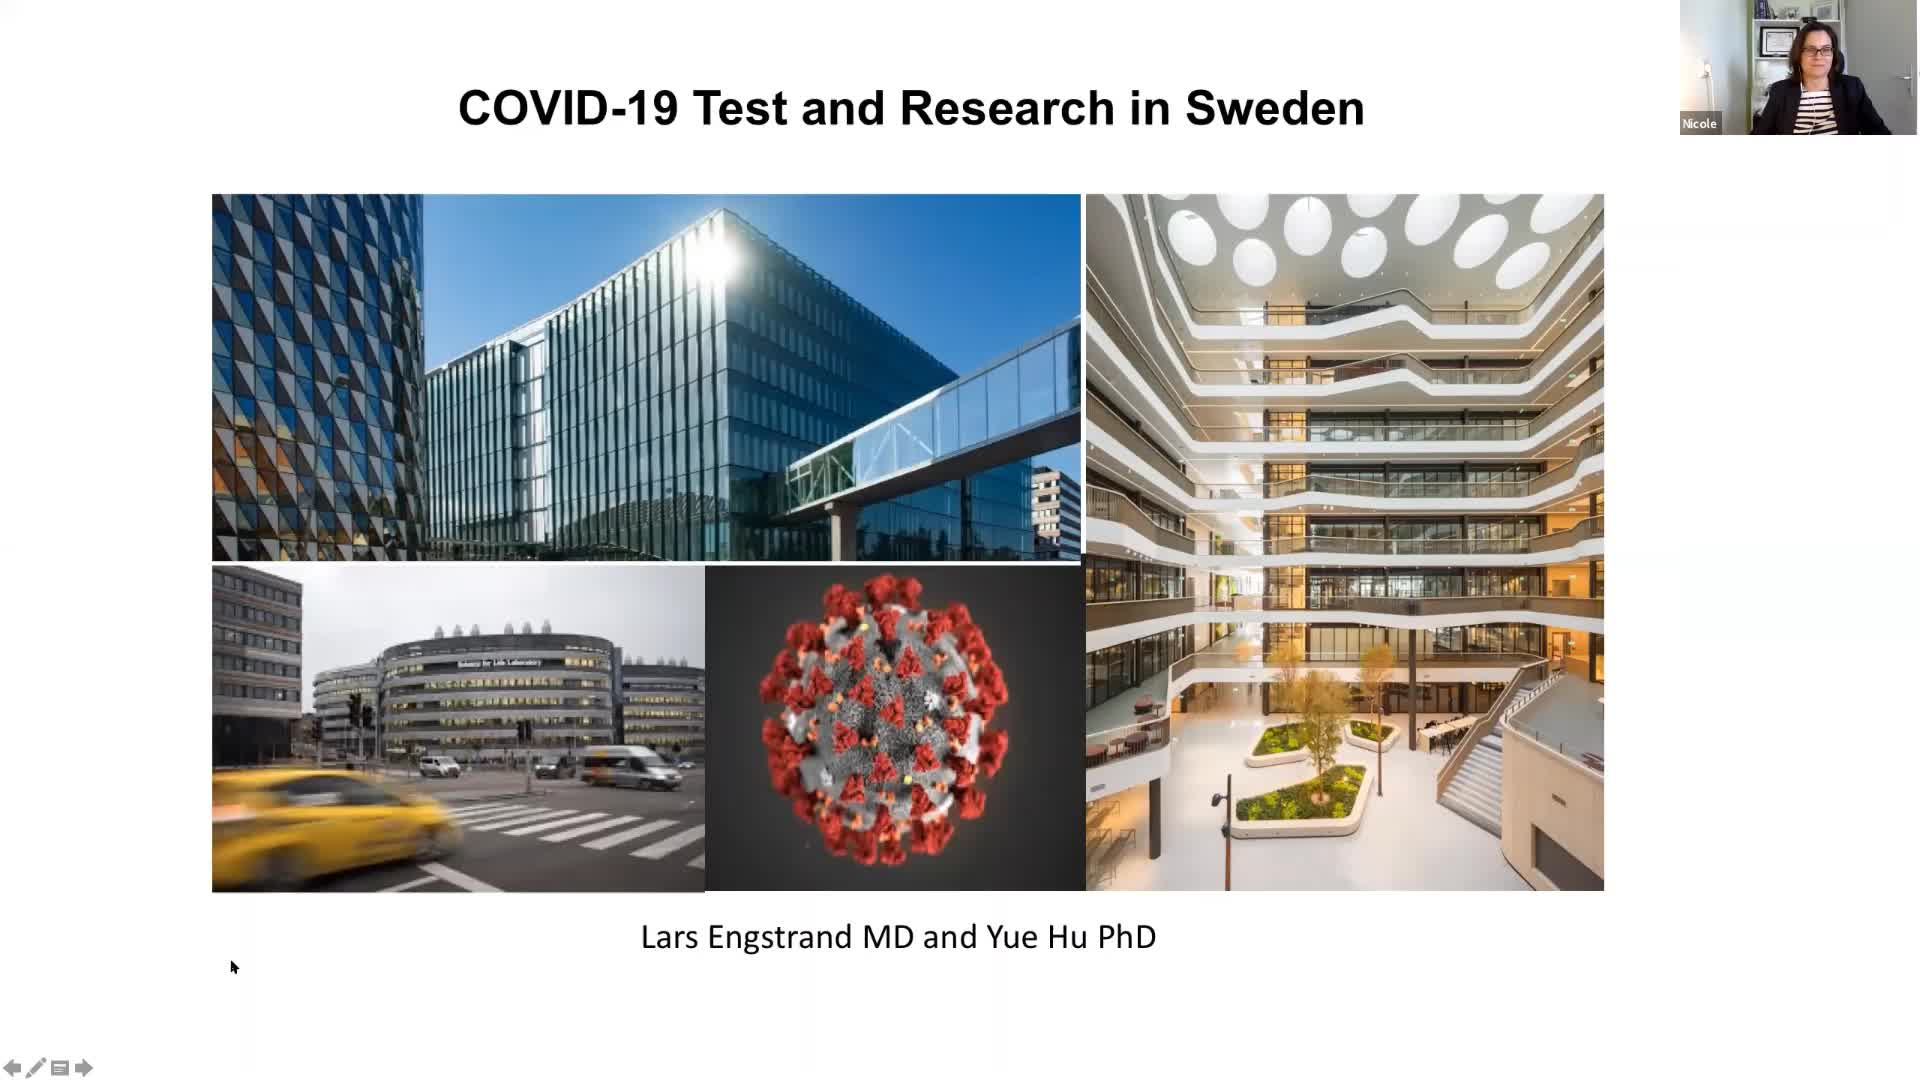 COVID-19 TEST AND RESEARCH in Sweden